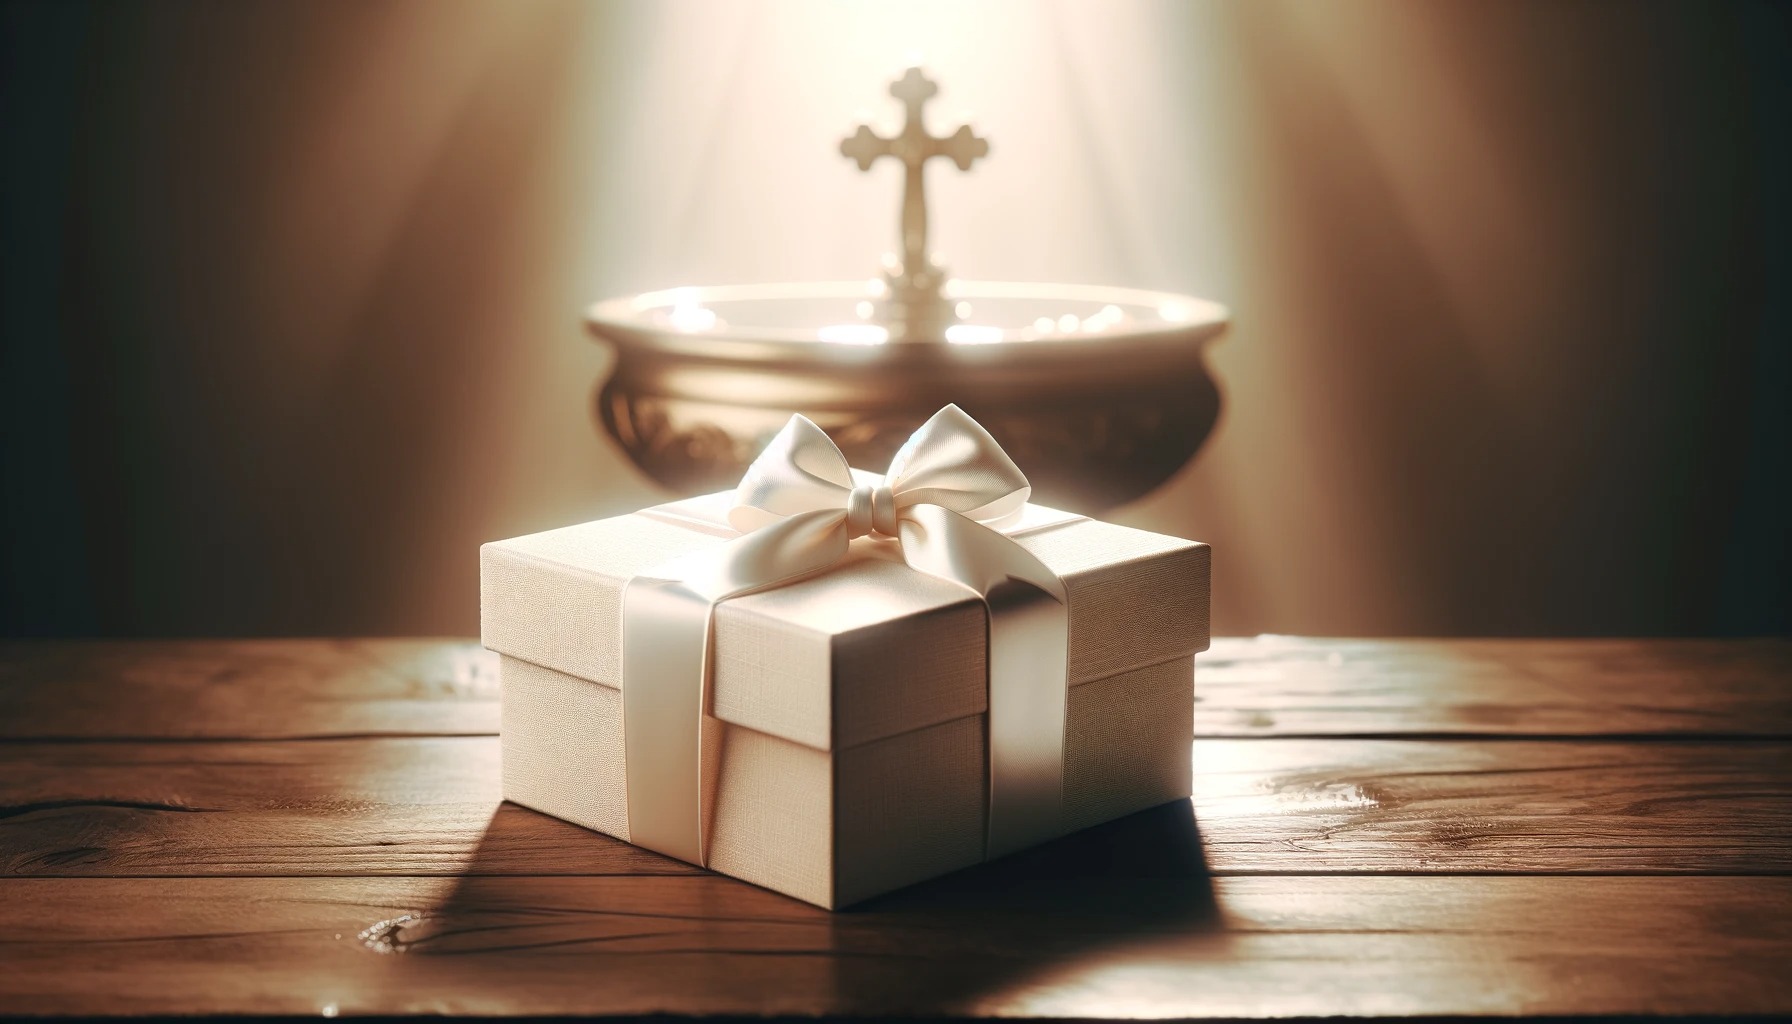 What Is An Appropriate Gift For A Catholic Baptism